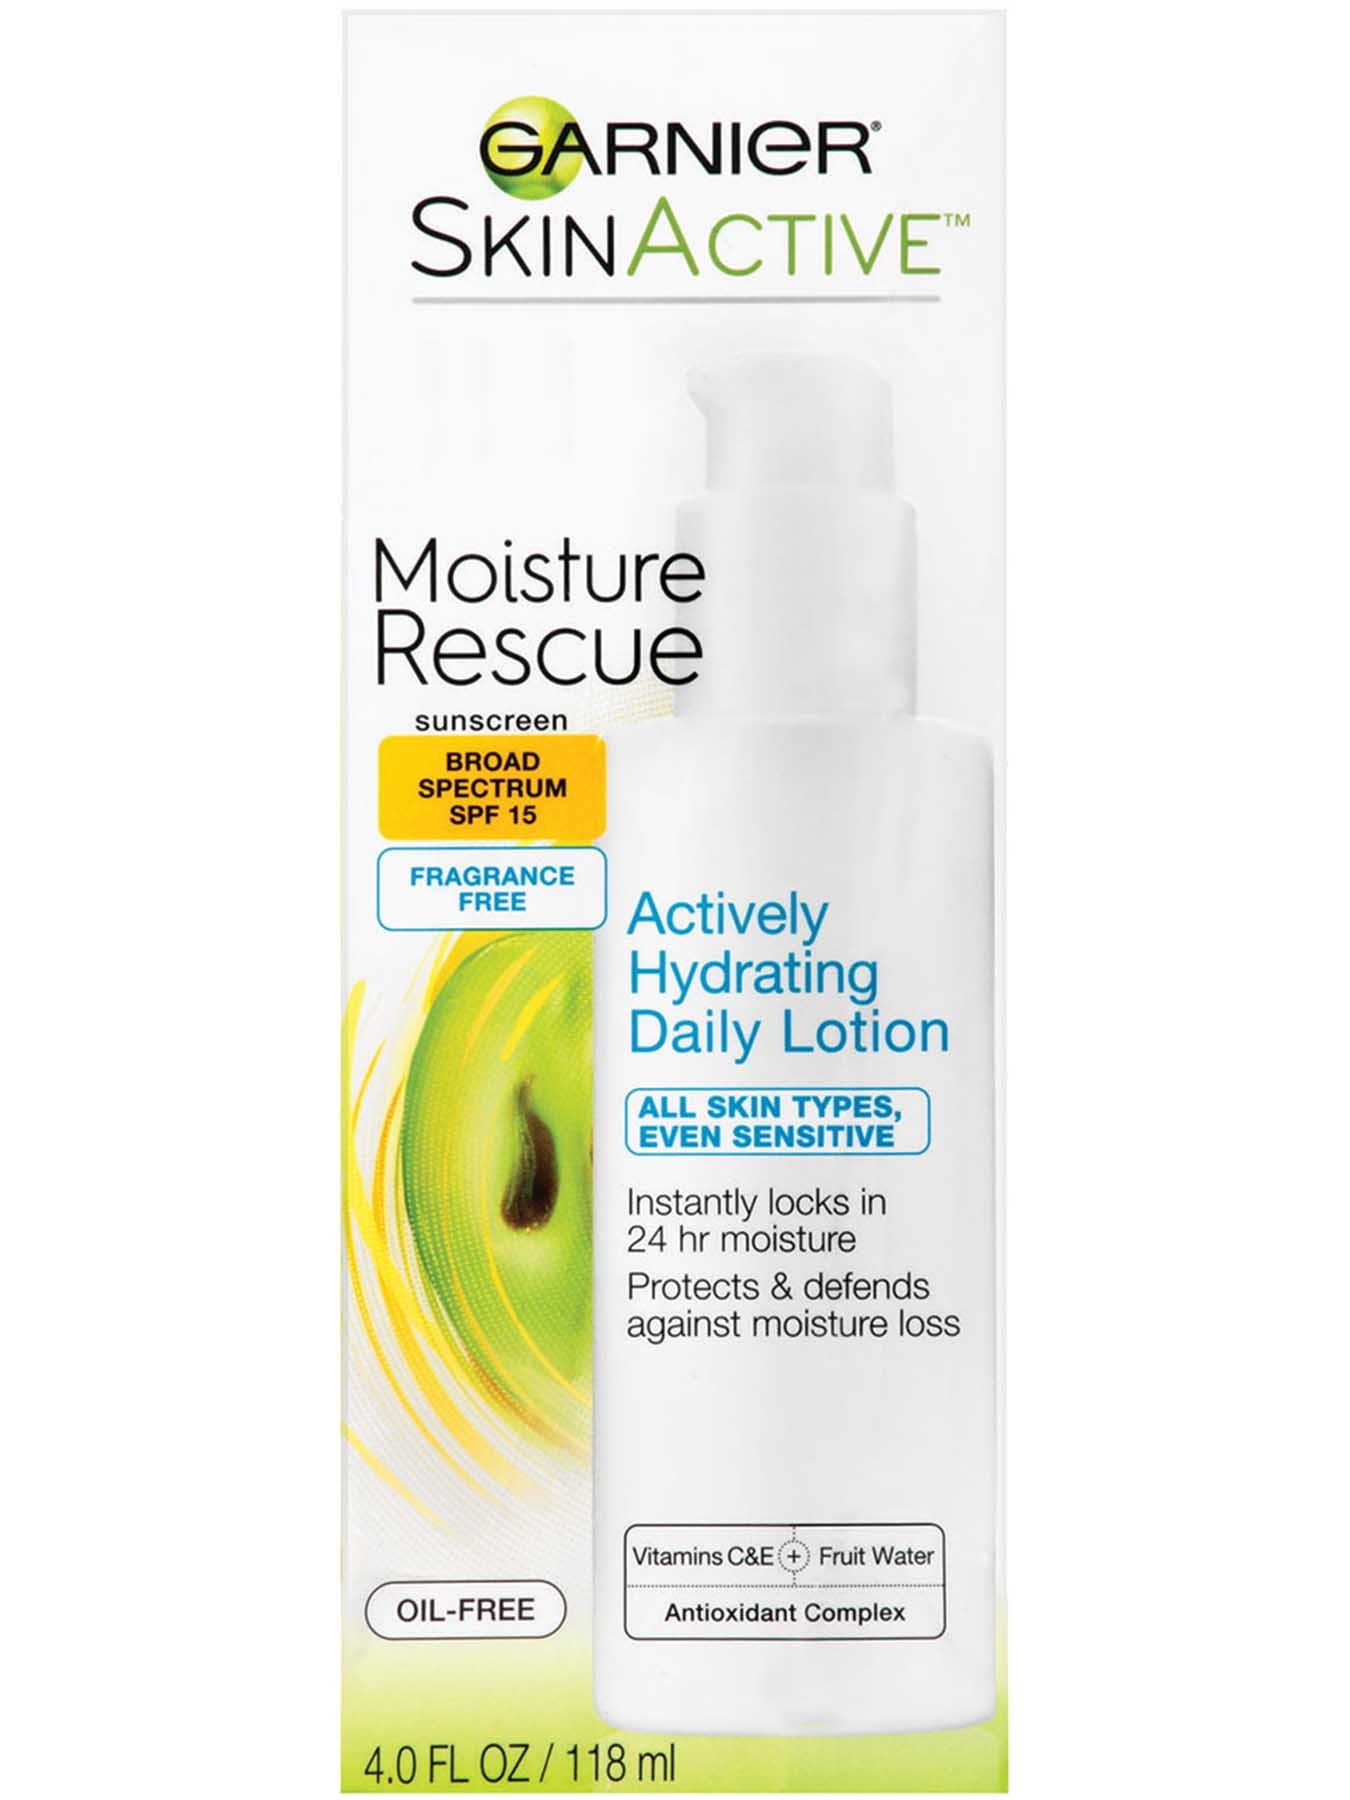 Moisture Rescue Broad Spectrum SPF 15, Fragrance Free, Actively Hydrating Daily Lotion.